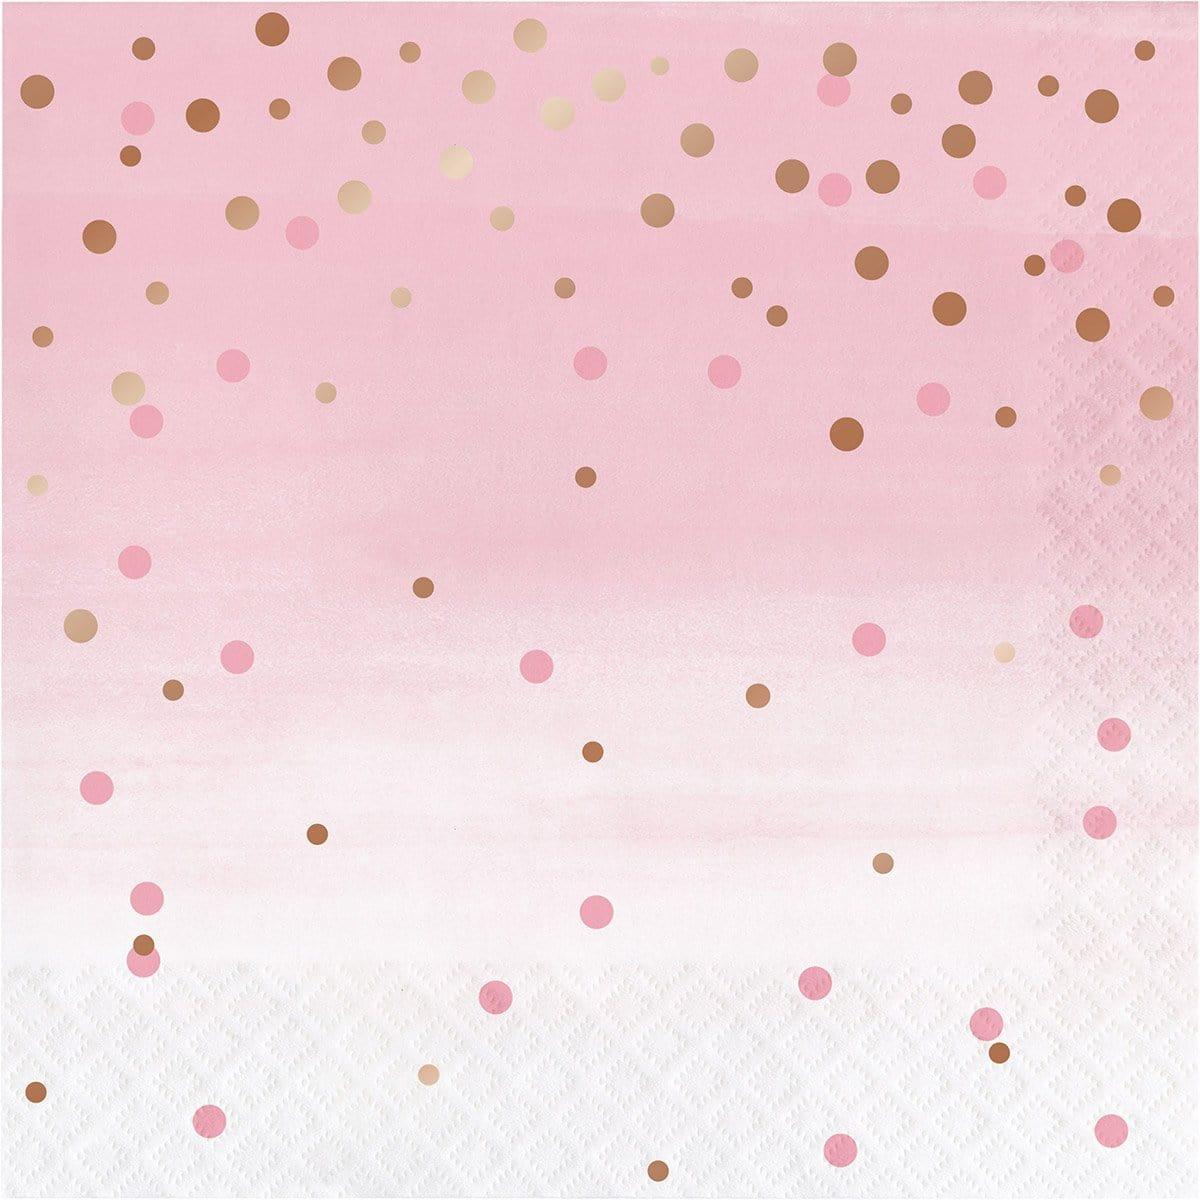 Buy Everyday Entertaining Rosé All Day Dots Lunch Napkins, 16 per Package sold at Party Expert